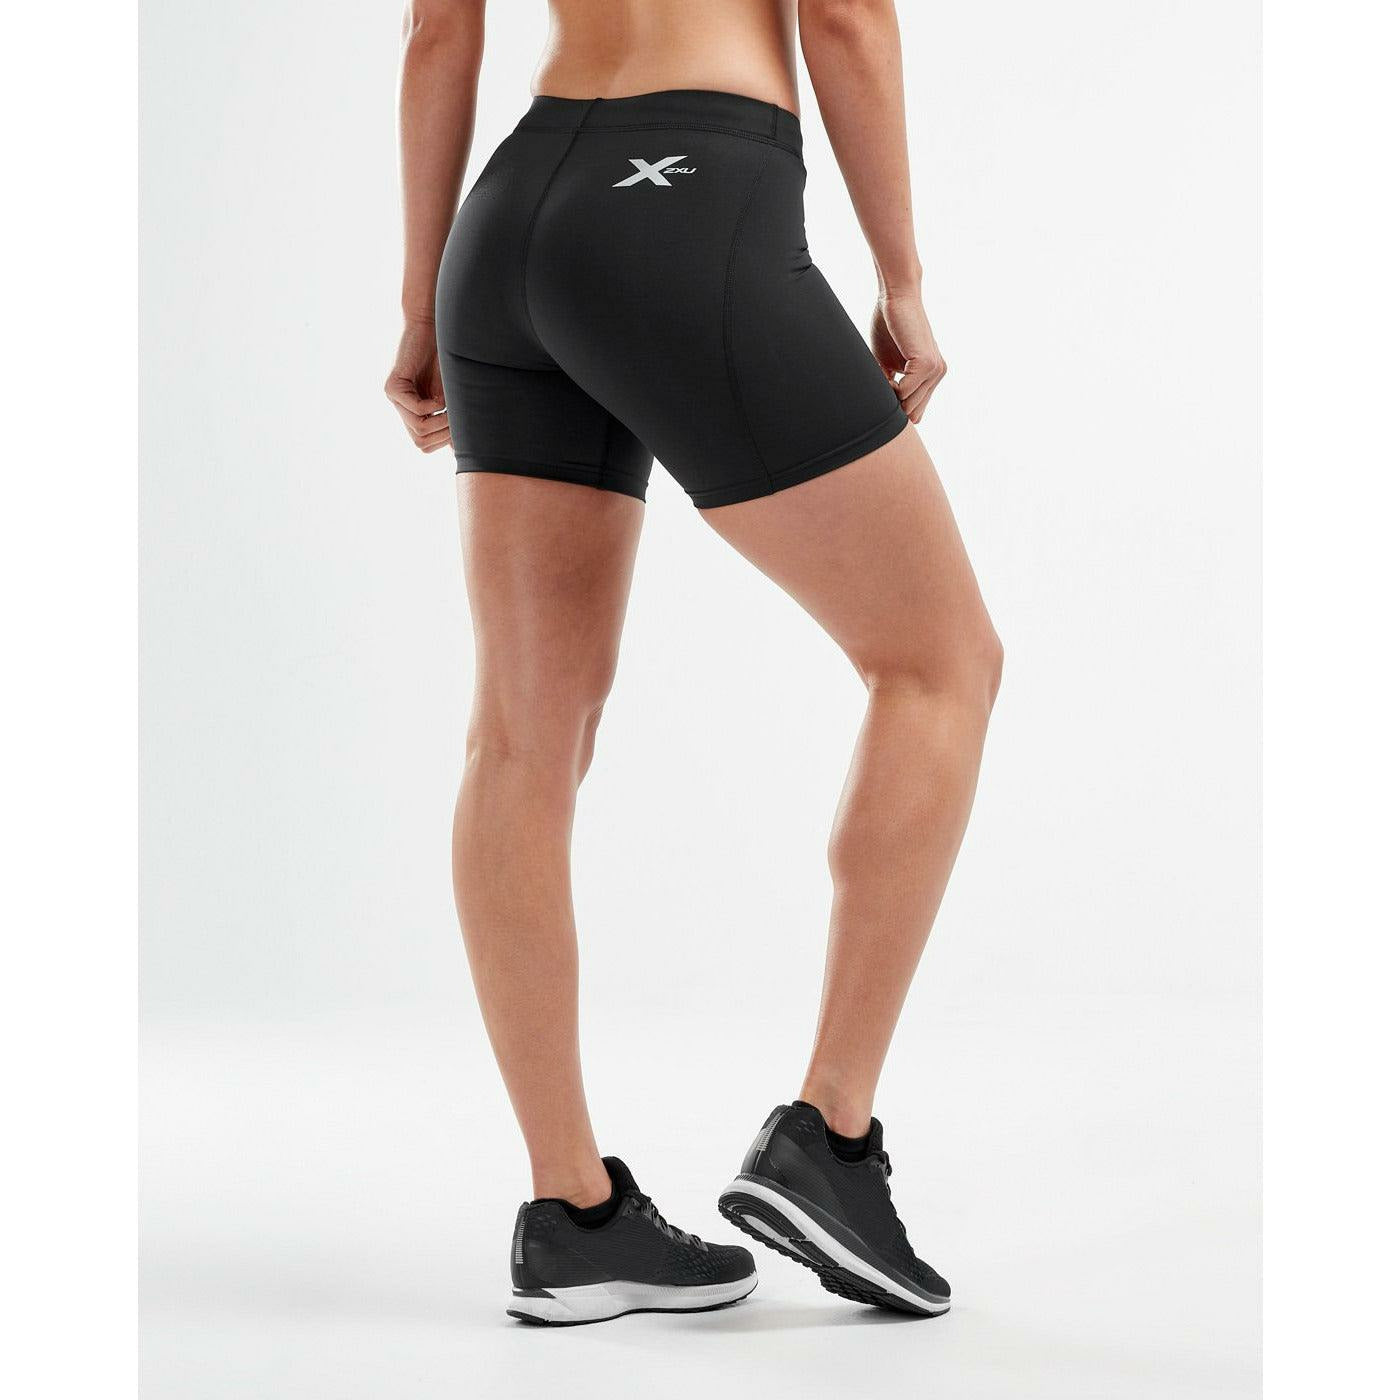 2XU Womens Gameday 5in Compression Shorts 